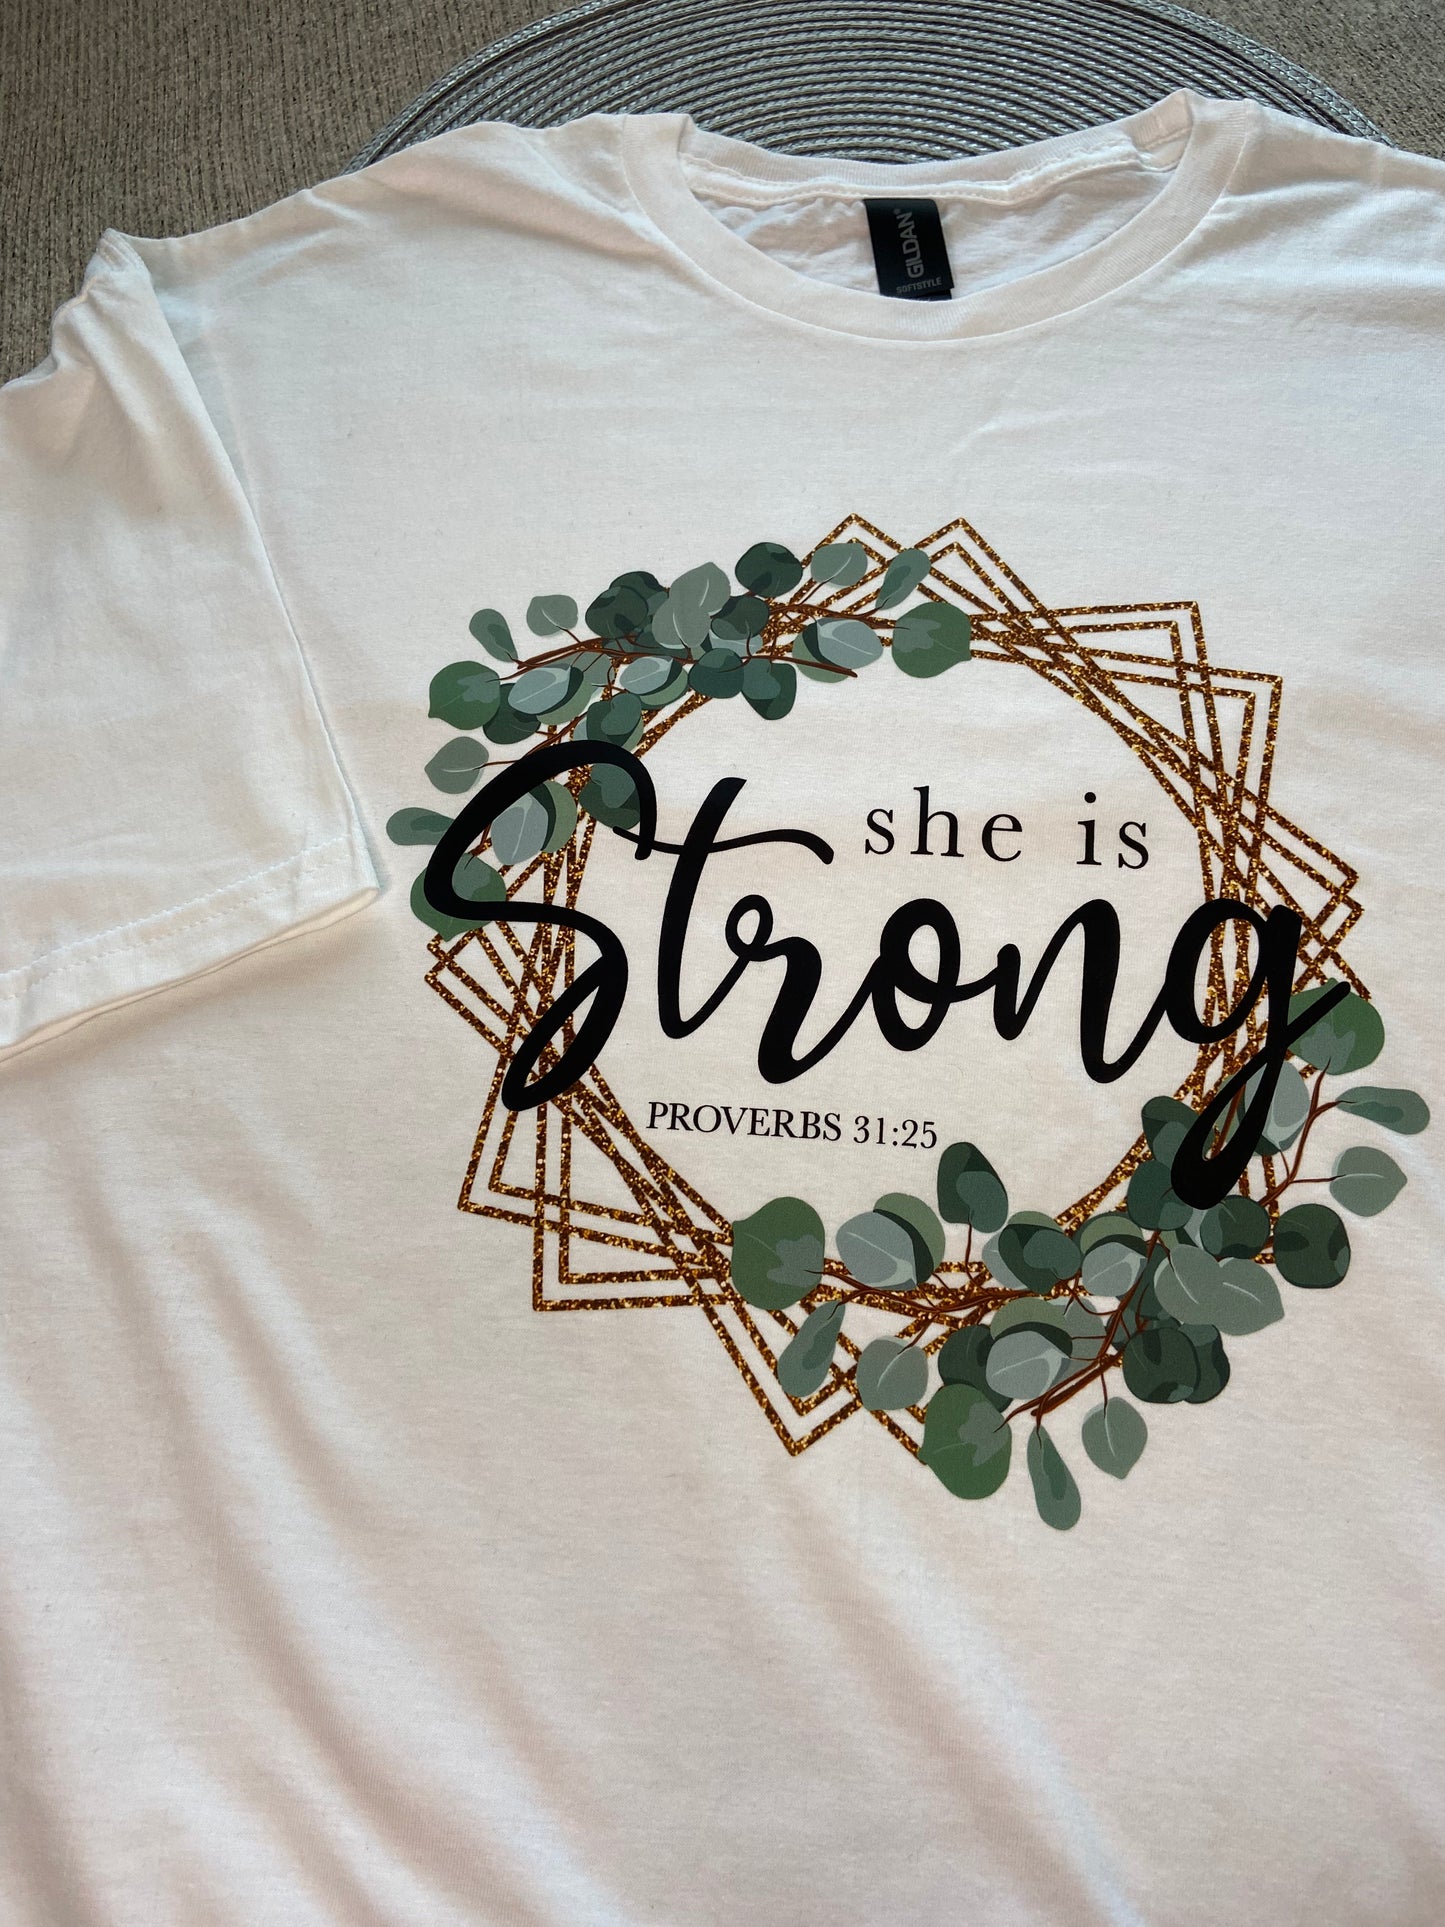 She is Strong - Proverbs Tee Shirt